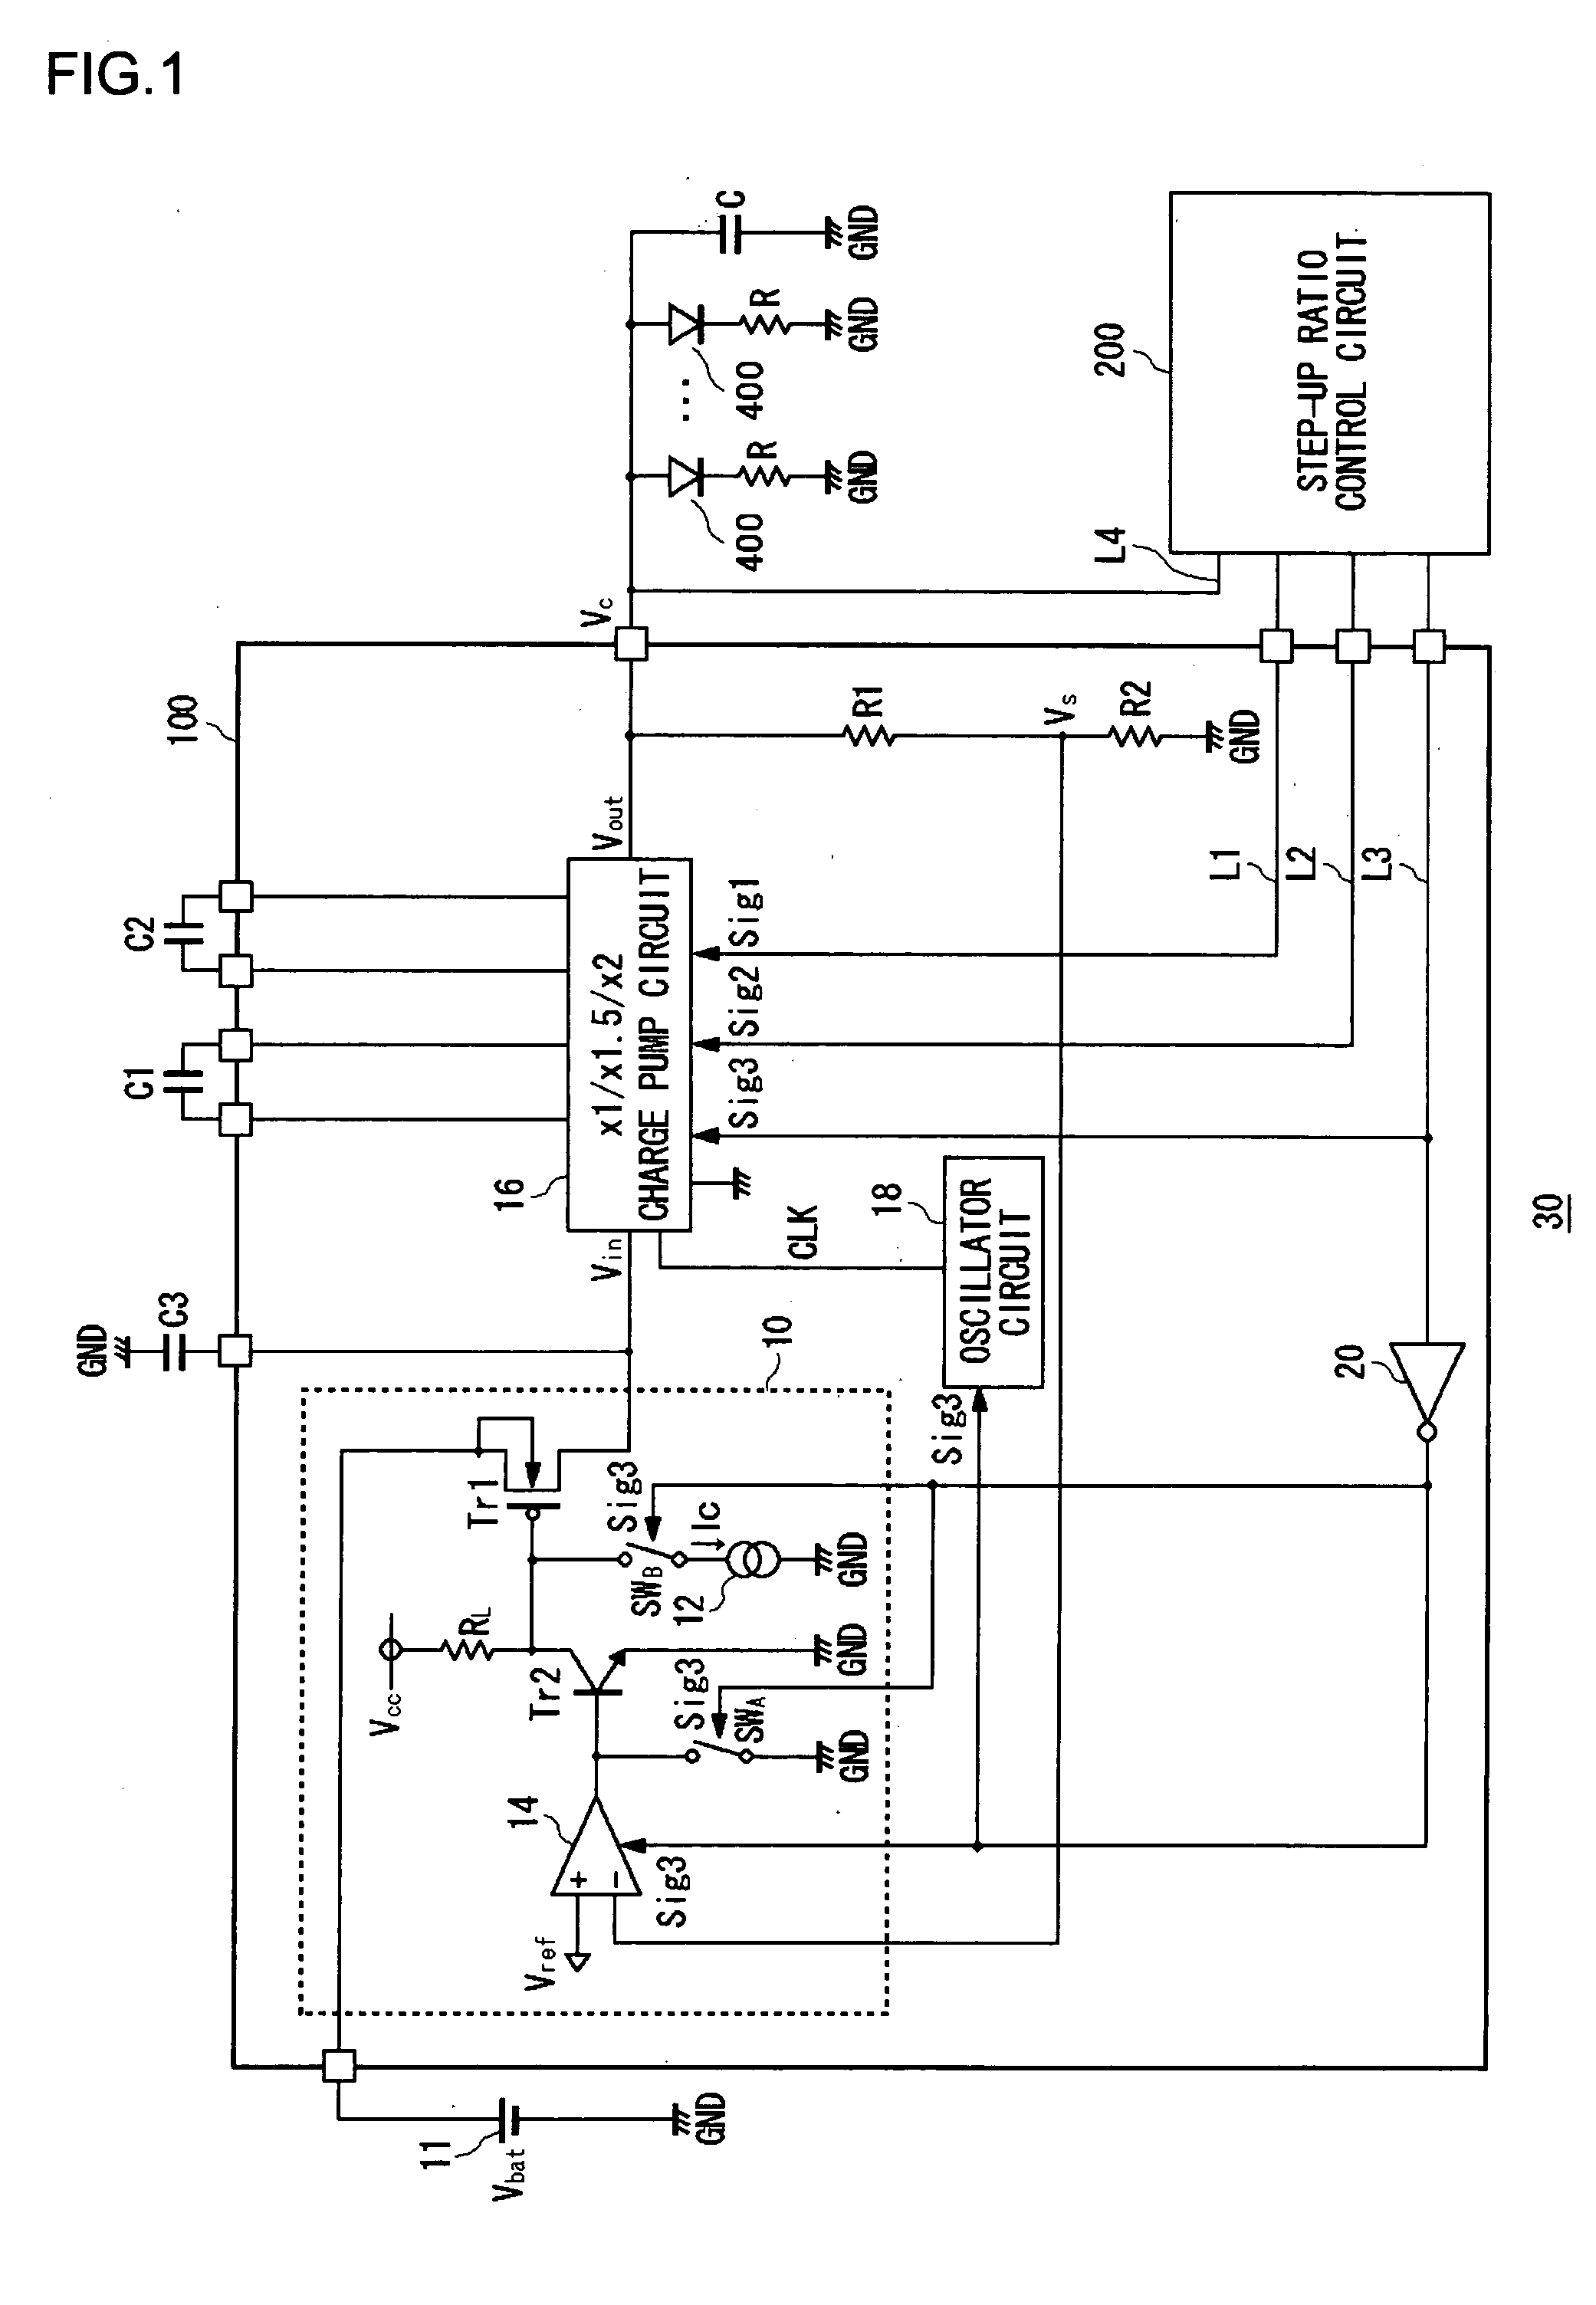 Boost circuit capable of step-up ratio control